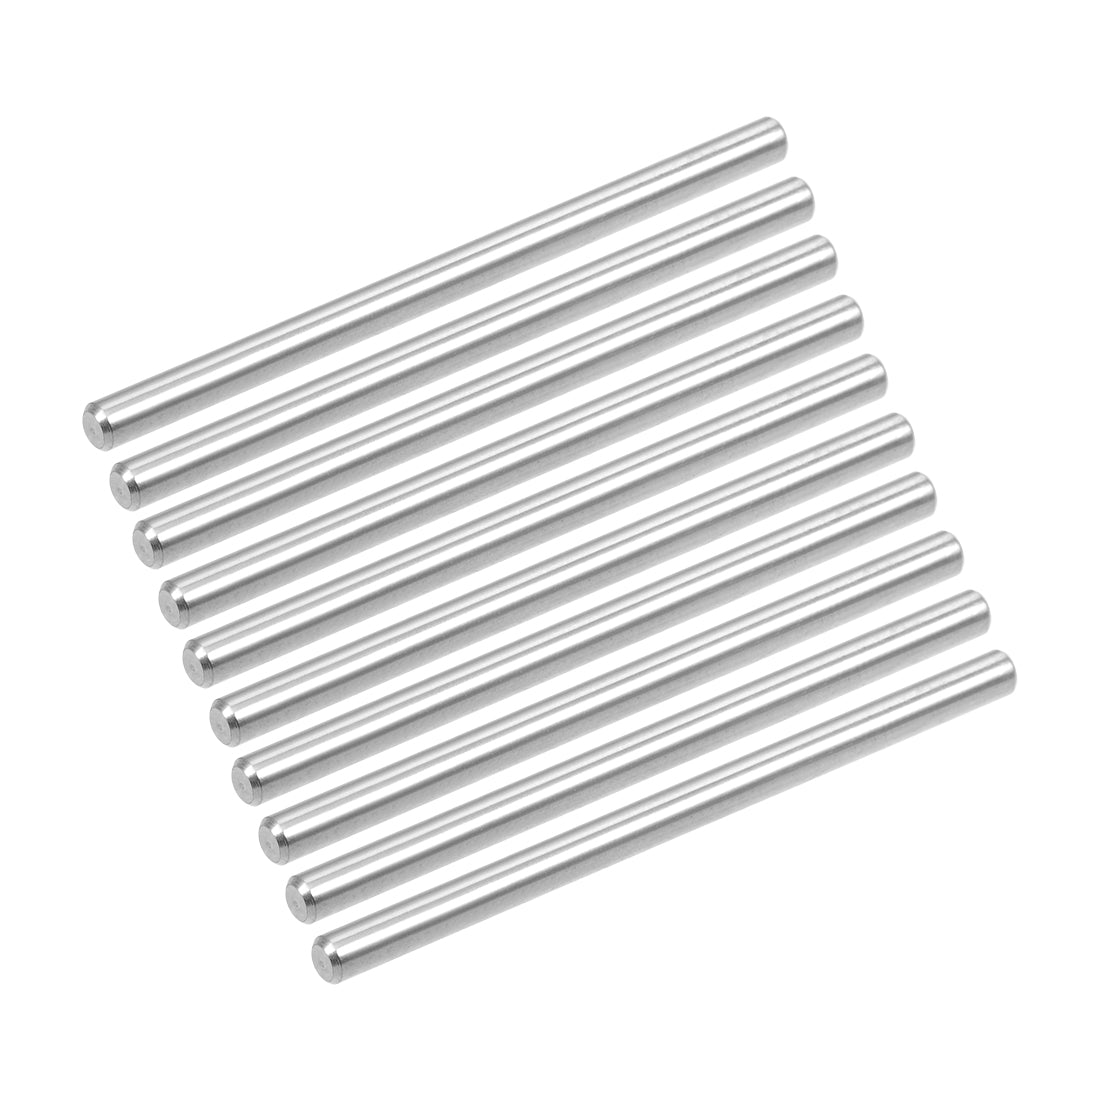 uxcell Uxcell 10Pcs  Dowel Pin 304 Stainless Steel Shelf Support Pin Fasten Elements Silver Tone